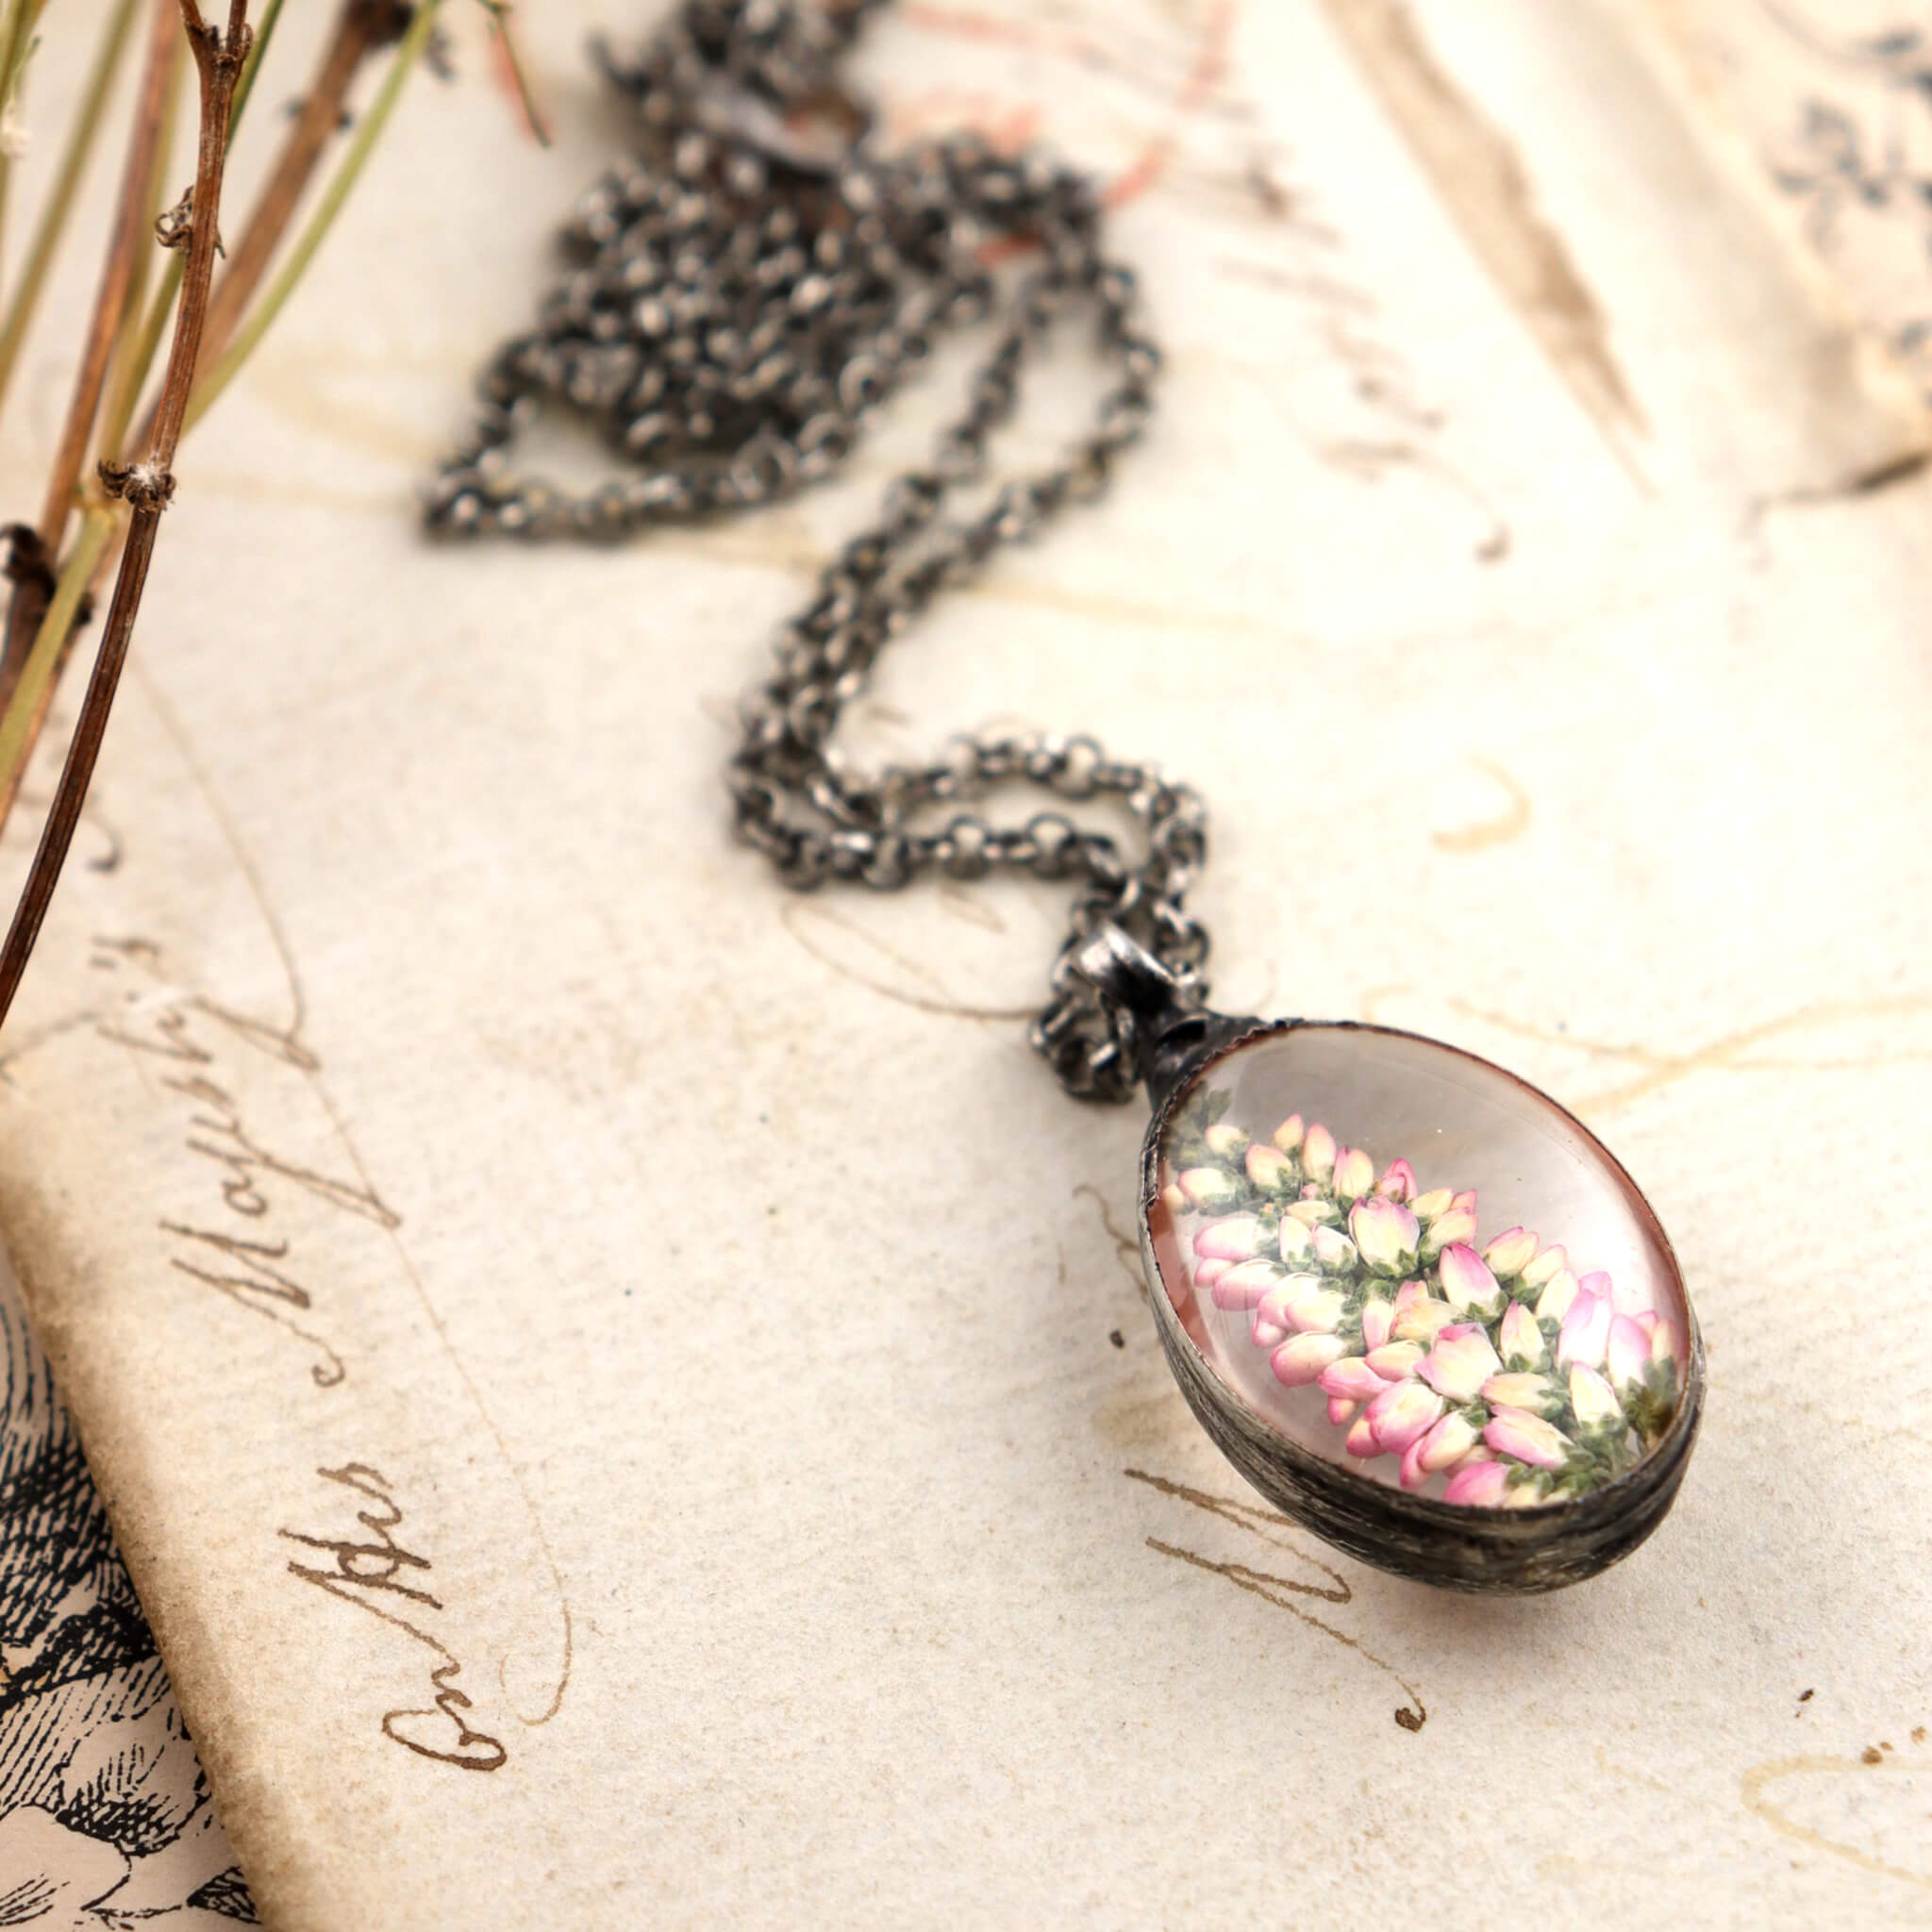 Pressed heather in a stained glass necklace lying on a vintage letter